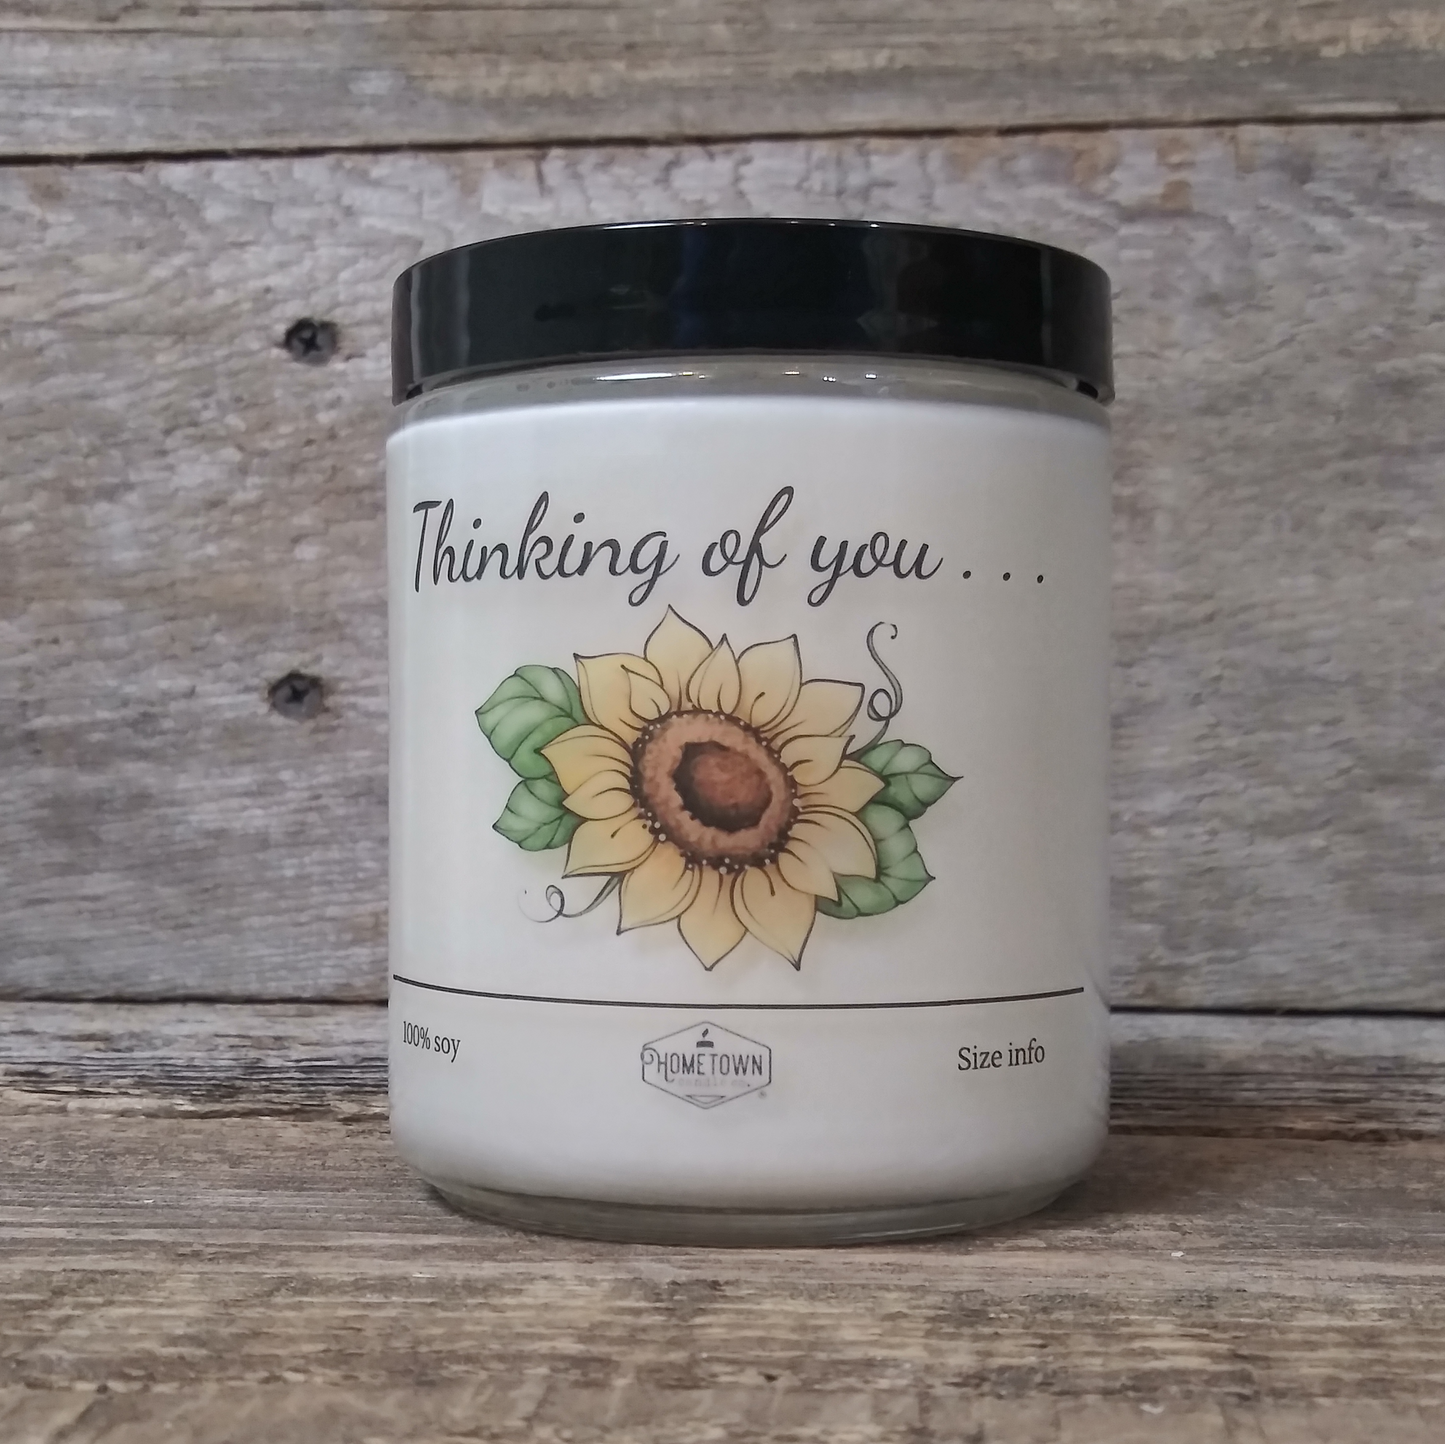 Care: Thinking of You (6 oz)